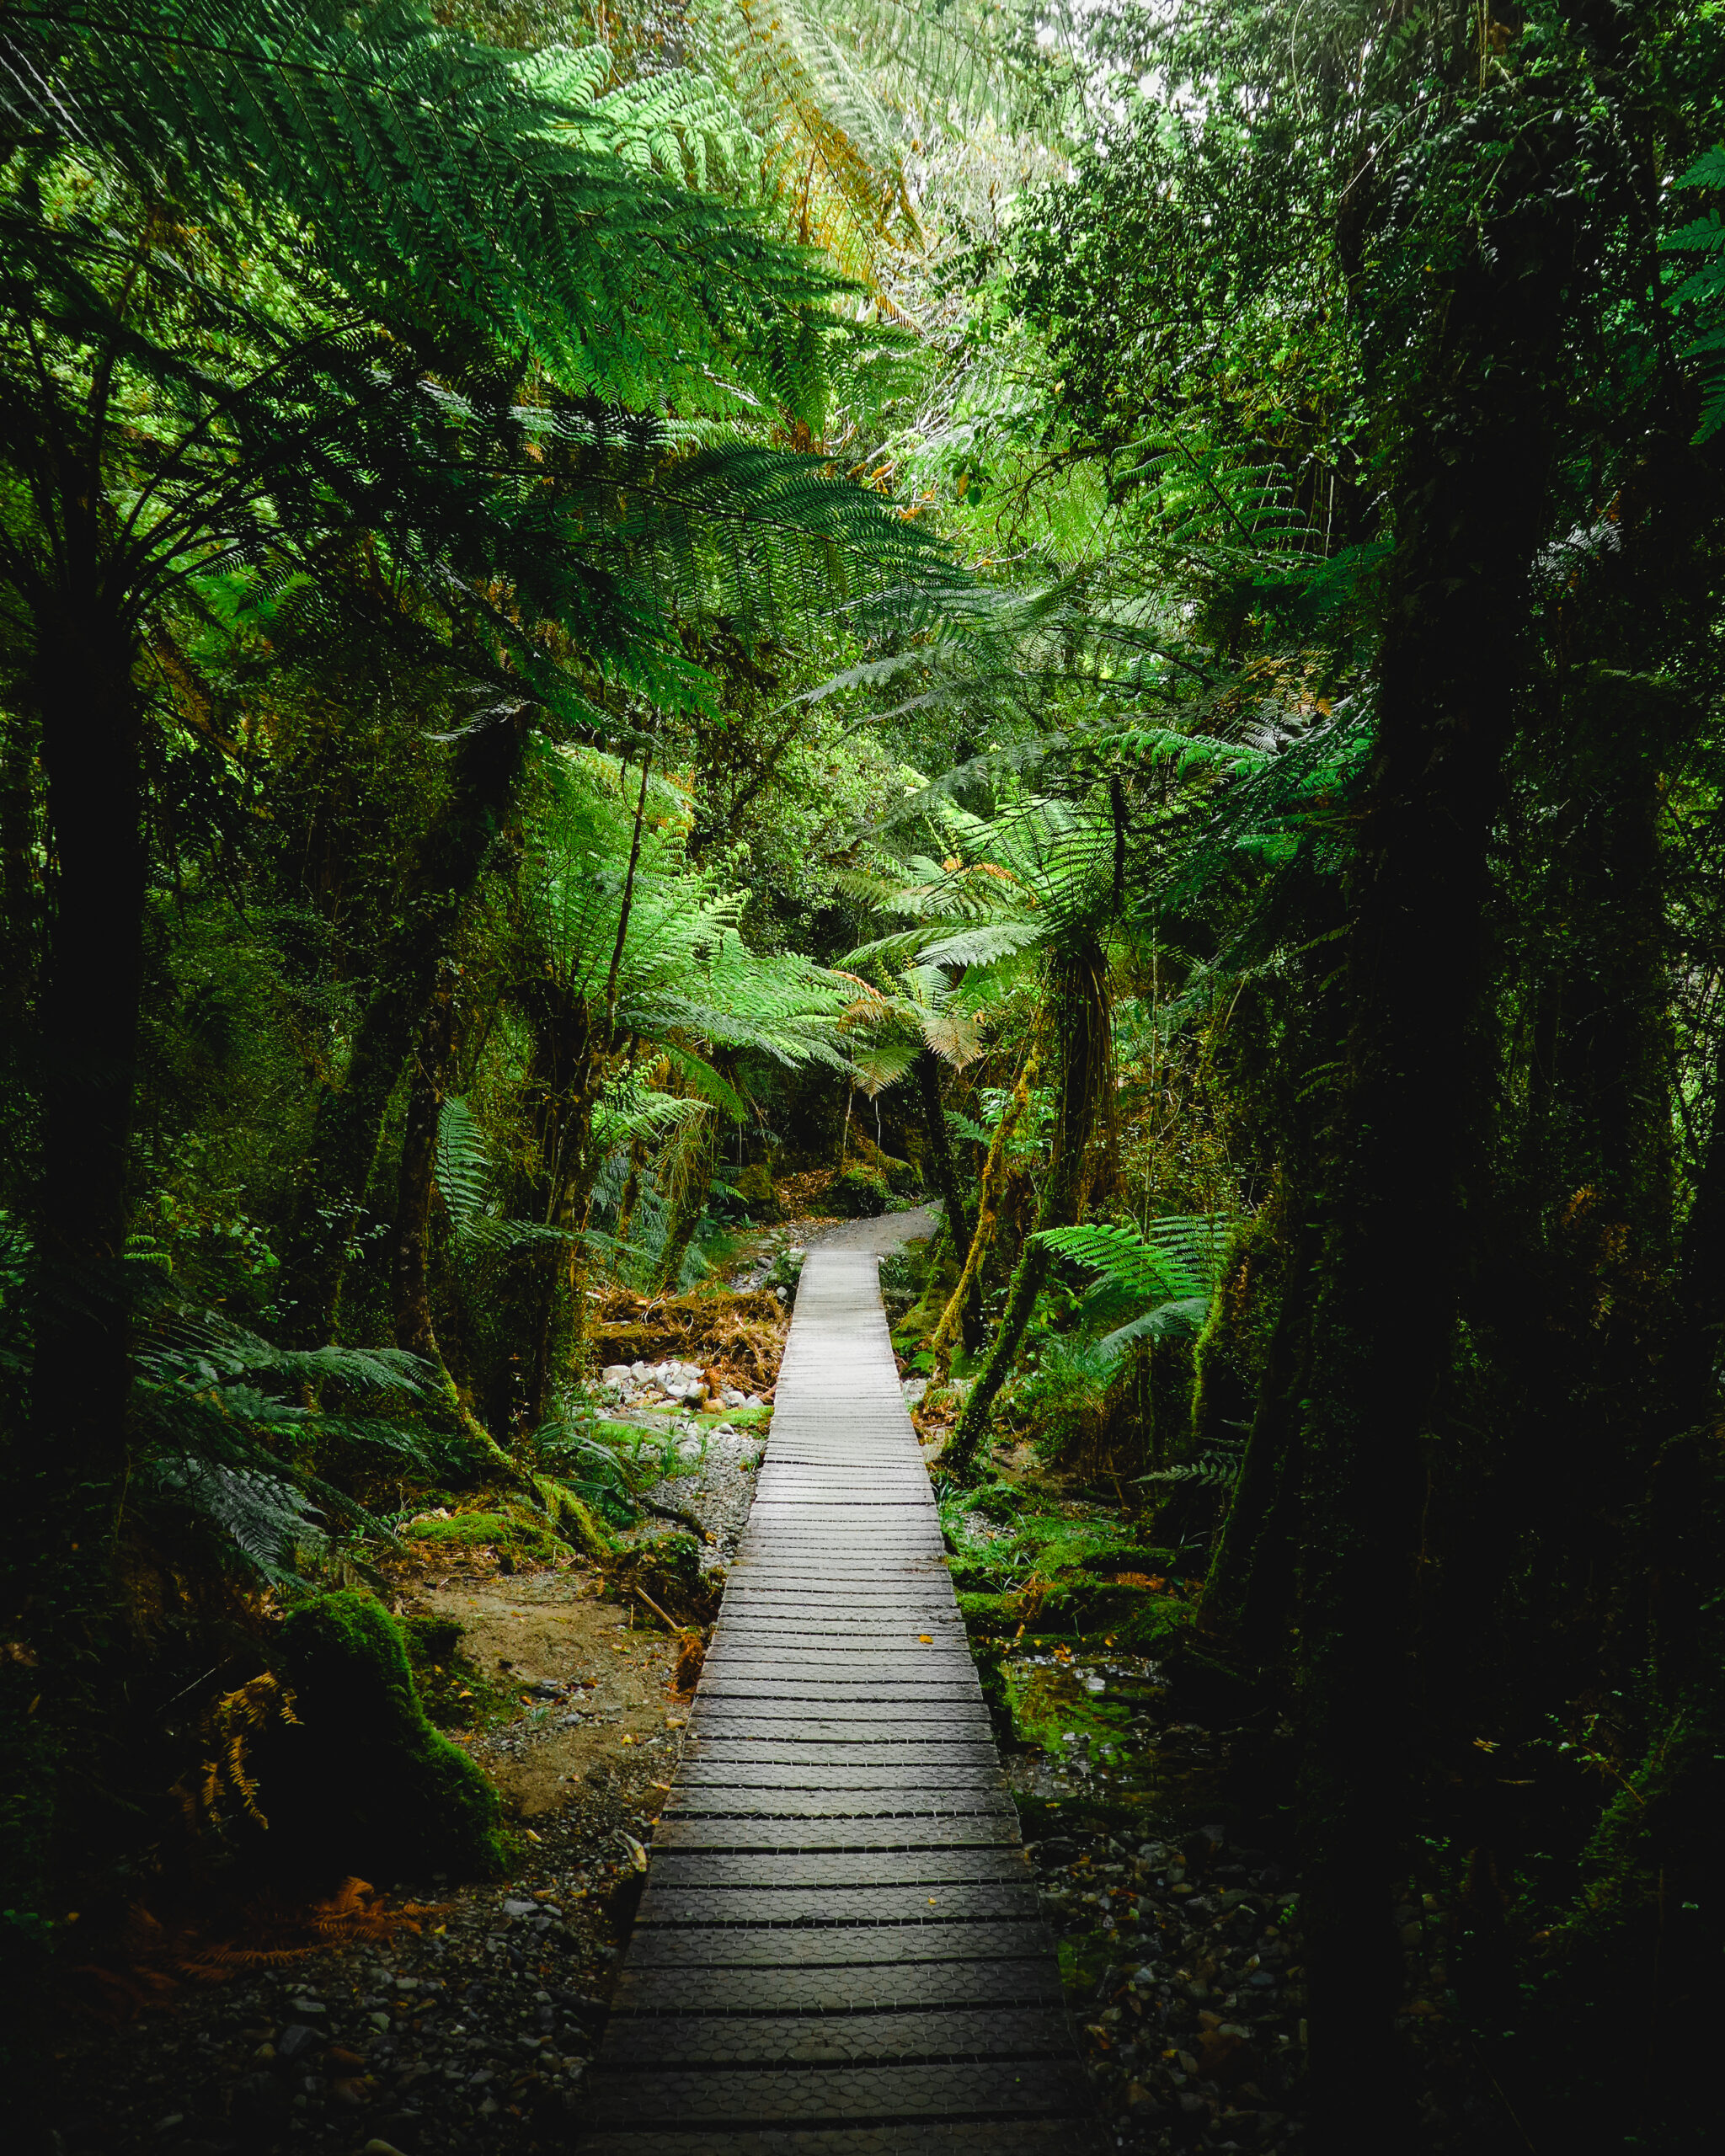 Wooden boardwalk surrounded by lush rainforest in New Zealand